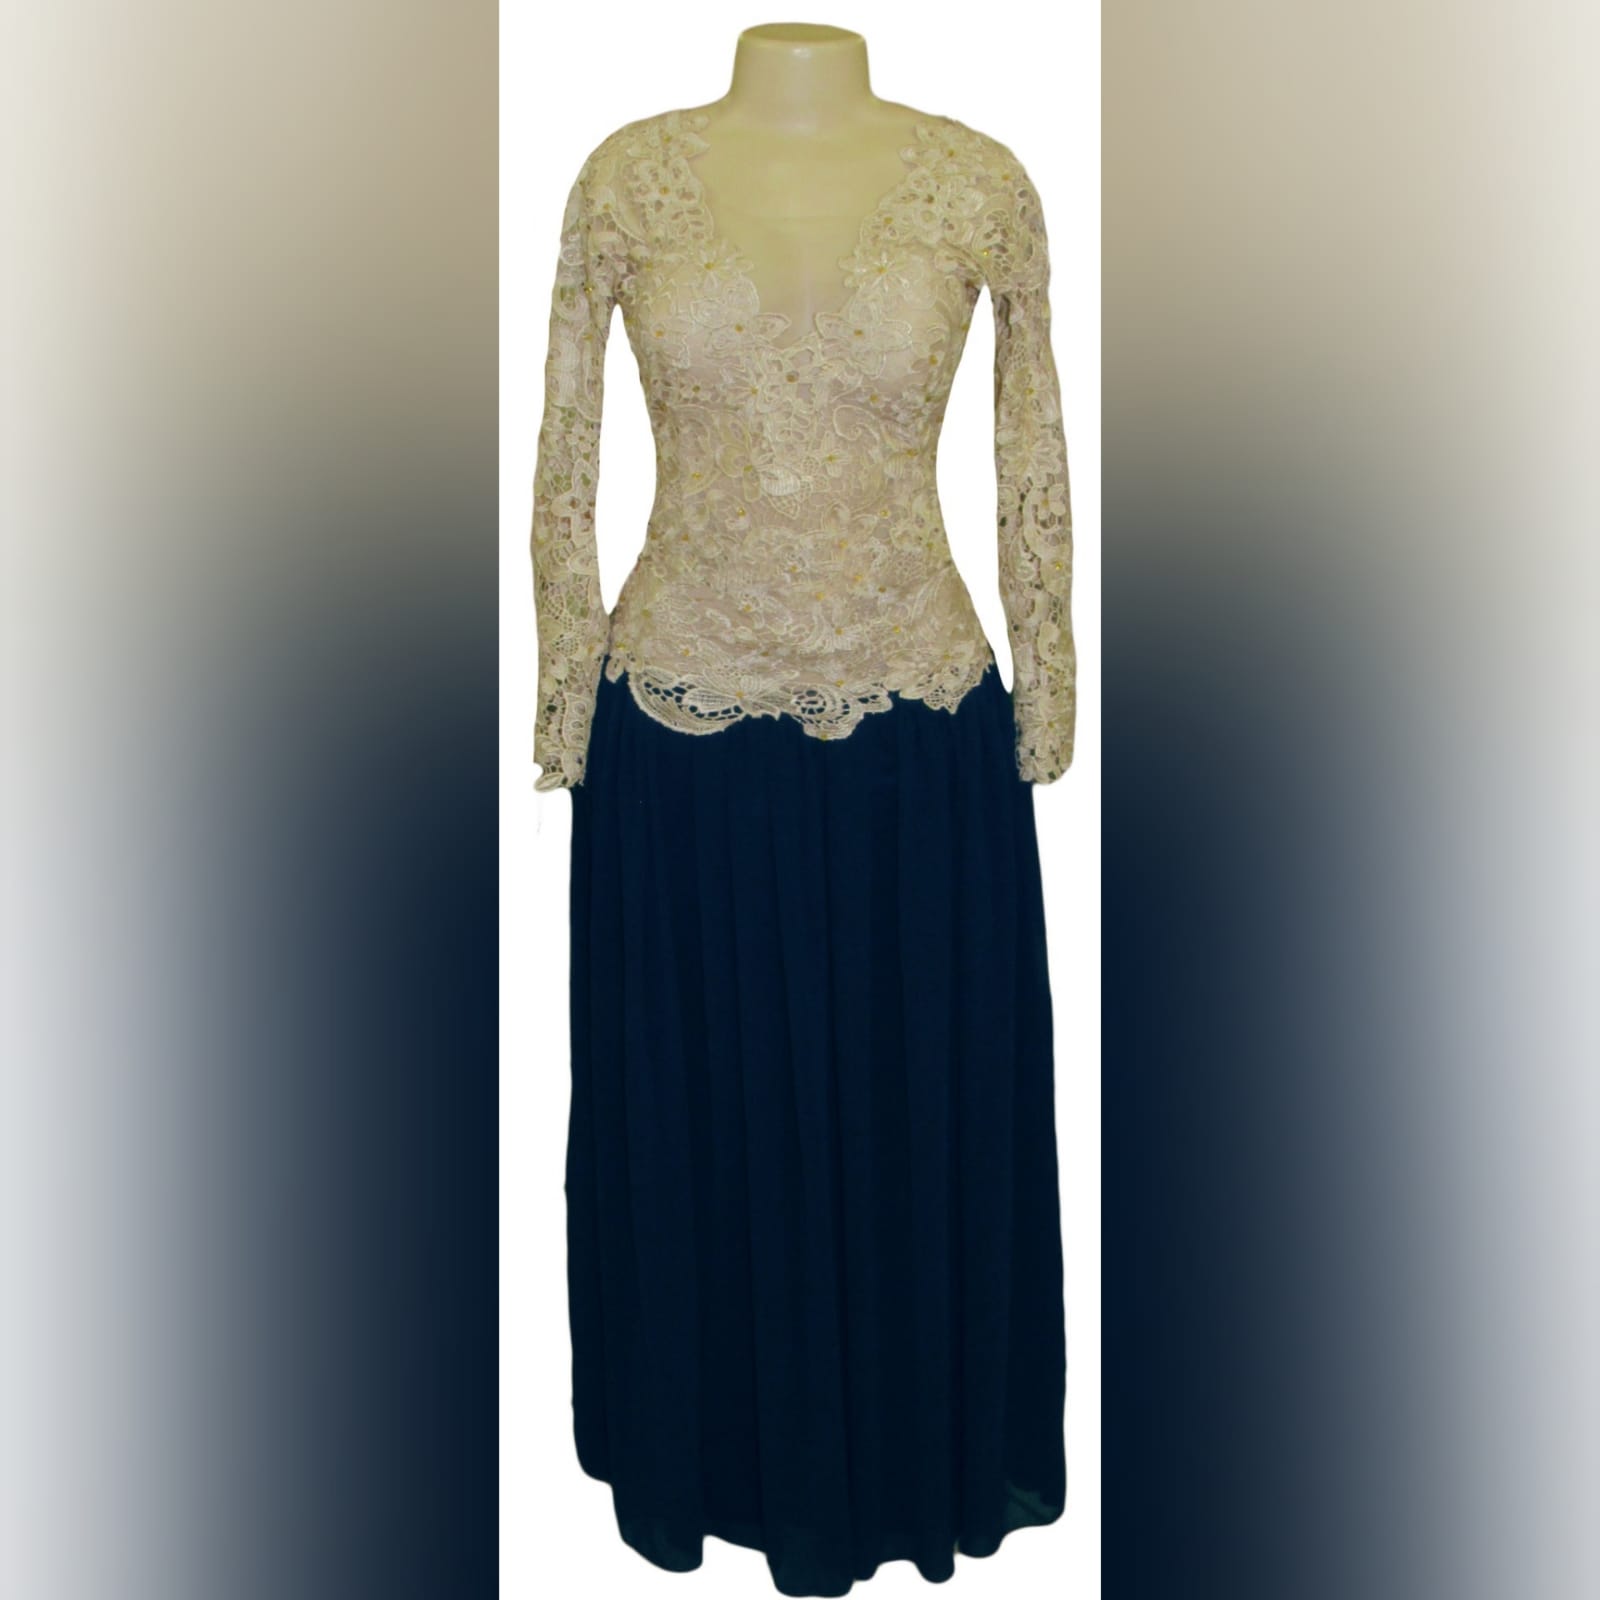 Navy blue and champagne lace prom dress 5 this evening dress design is a classic and can be worn to several occasions. Navy blue and champagne lace prom dress, with a lace bodice and long sleeves, illusion open back detailed with buttons and gold beads. Bottom in a navy blue gathered chiffon adding a great movement to the dress.